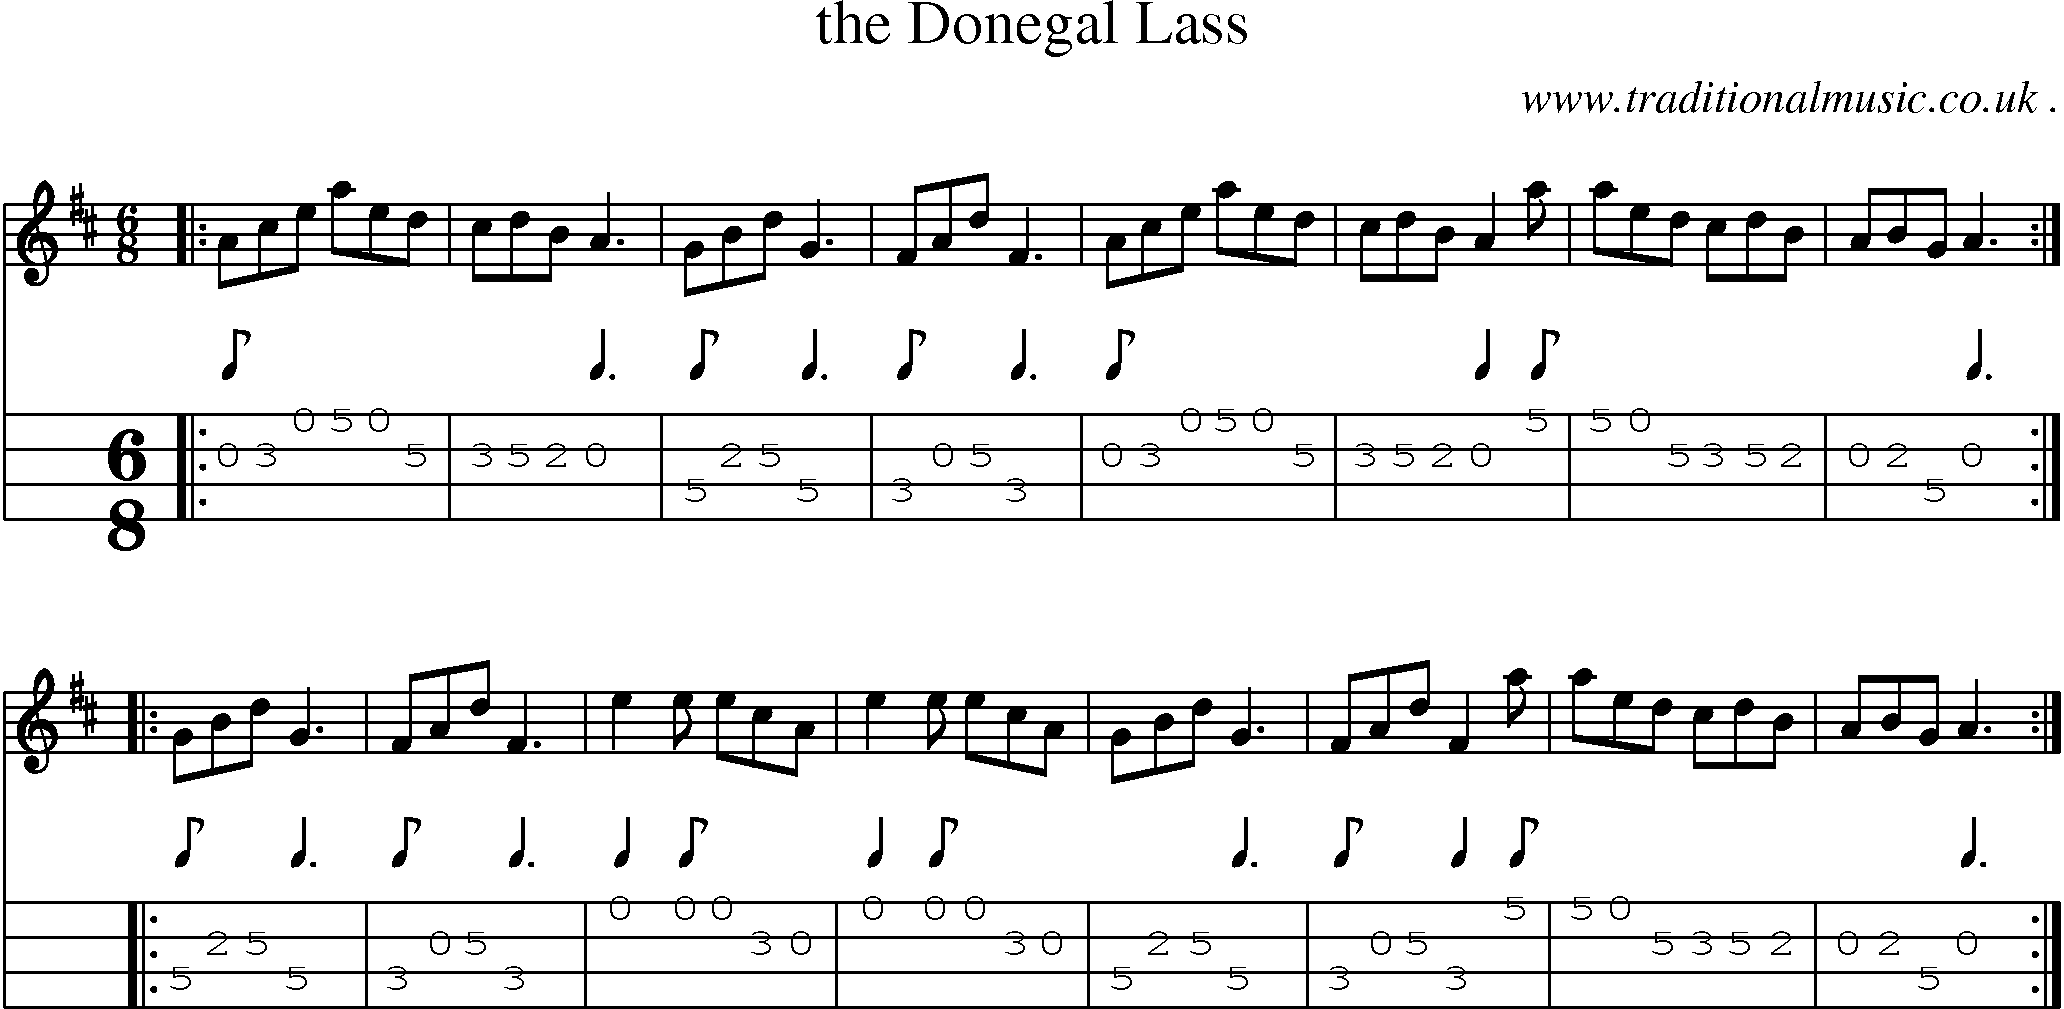 Sheet-music  score, Chords and Mandolin Tabs for The Donegal Lass